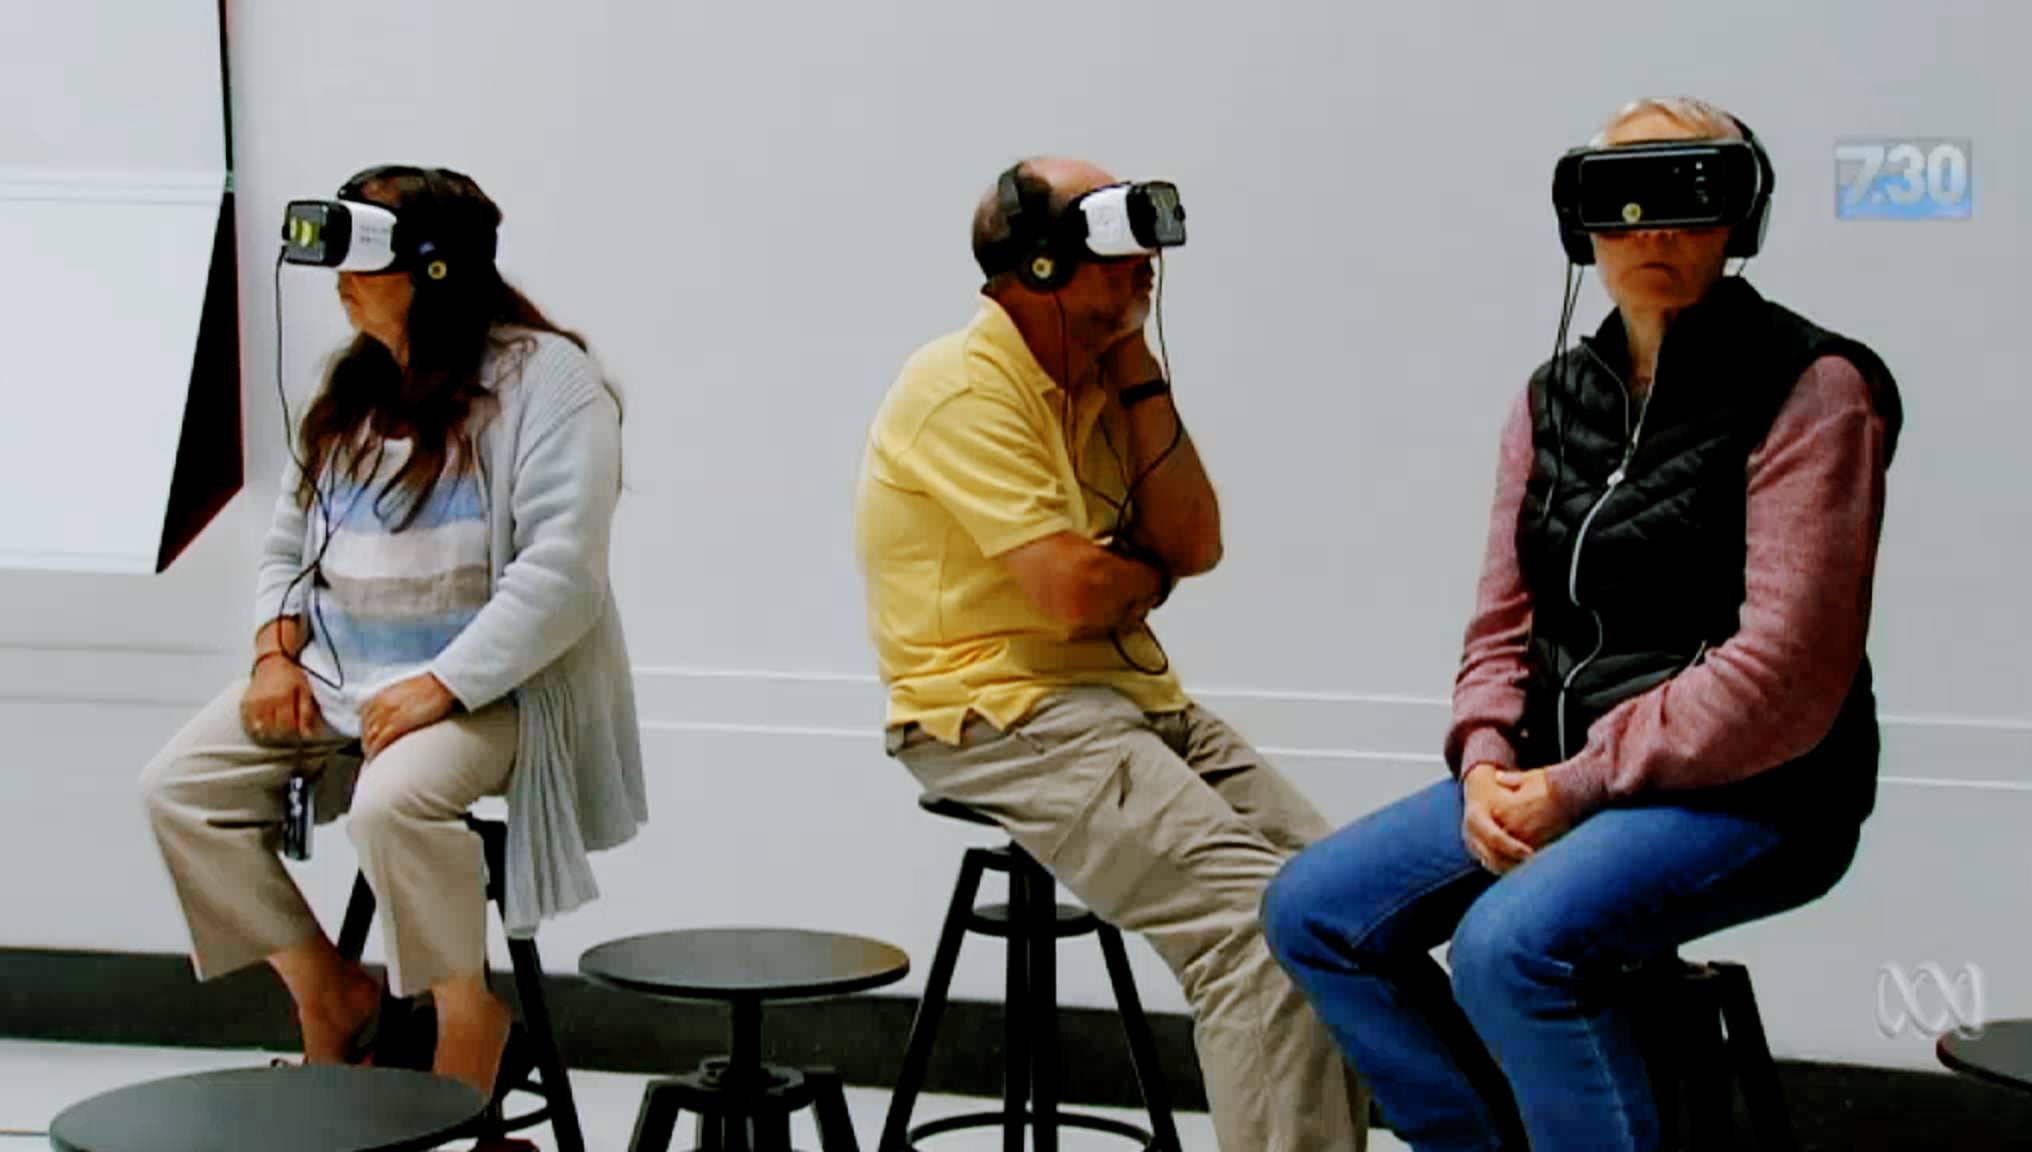 Three white people, a woman and two men, sitting on stools with virtual reality goggles covering their eyes. Each person is staring in a different direction. Video still.